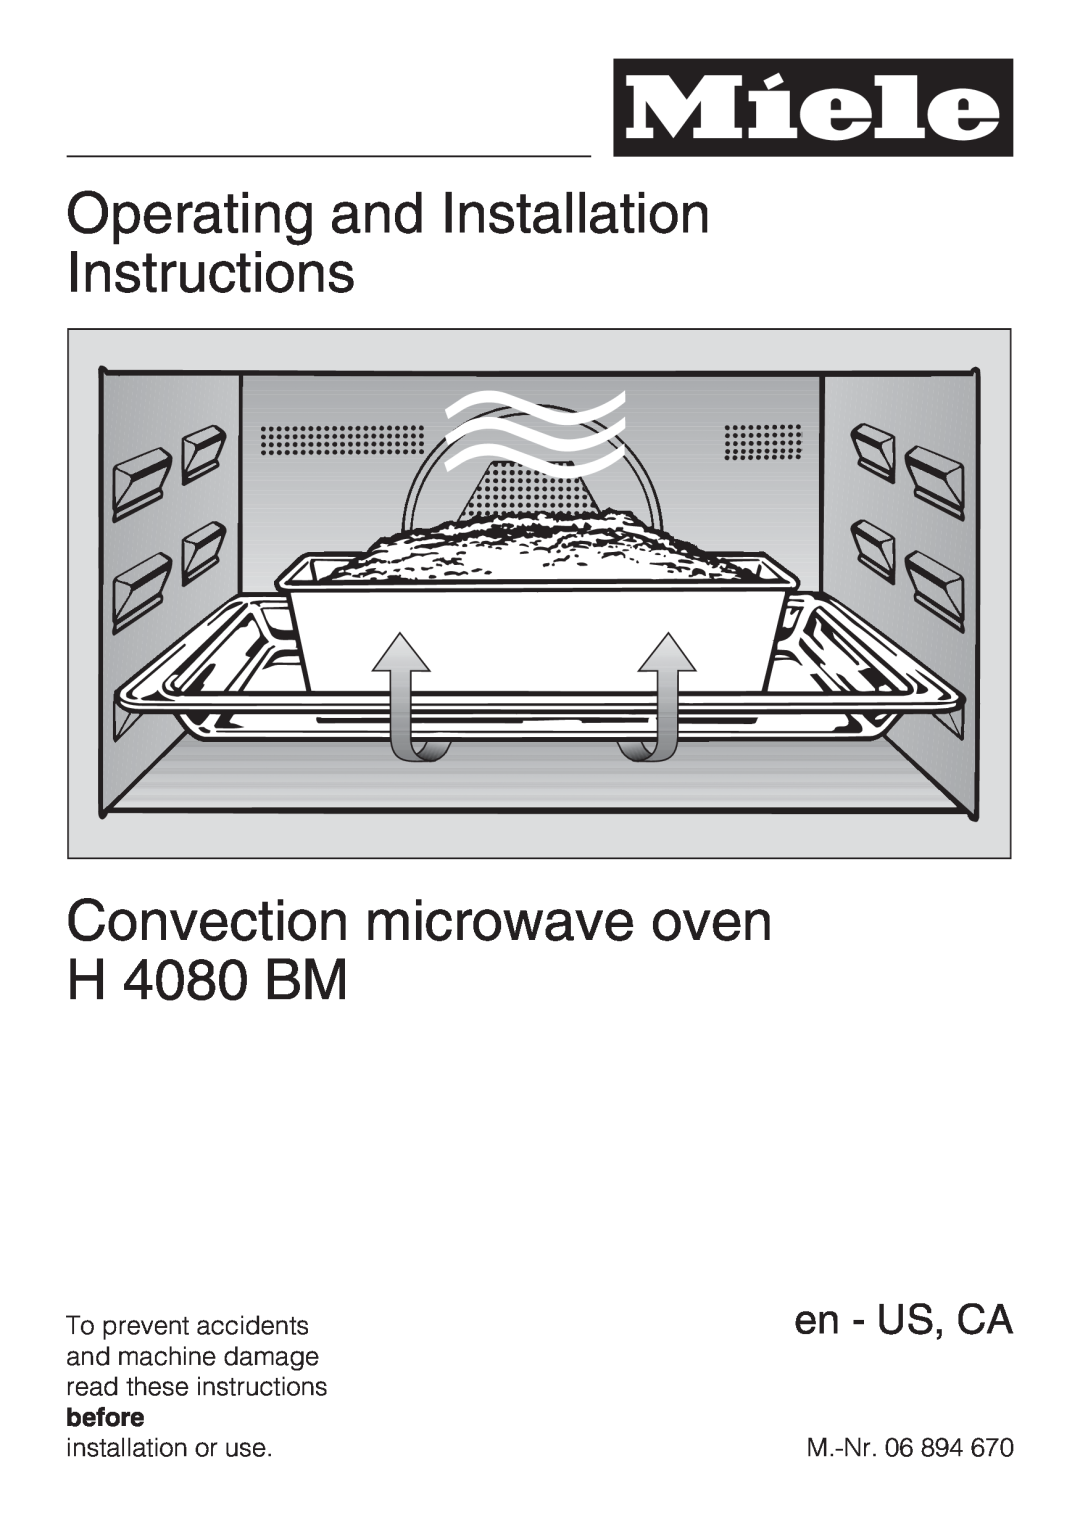 Miele H4080BM installation instructions Operating and Installation, Instructions, Convection microwave oven H 4080 BM 